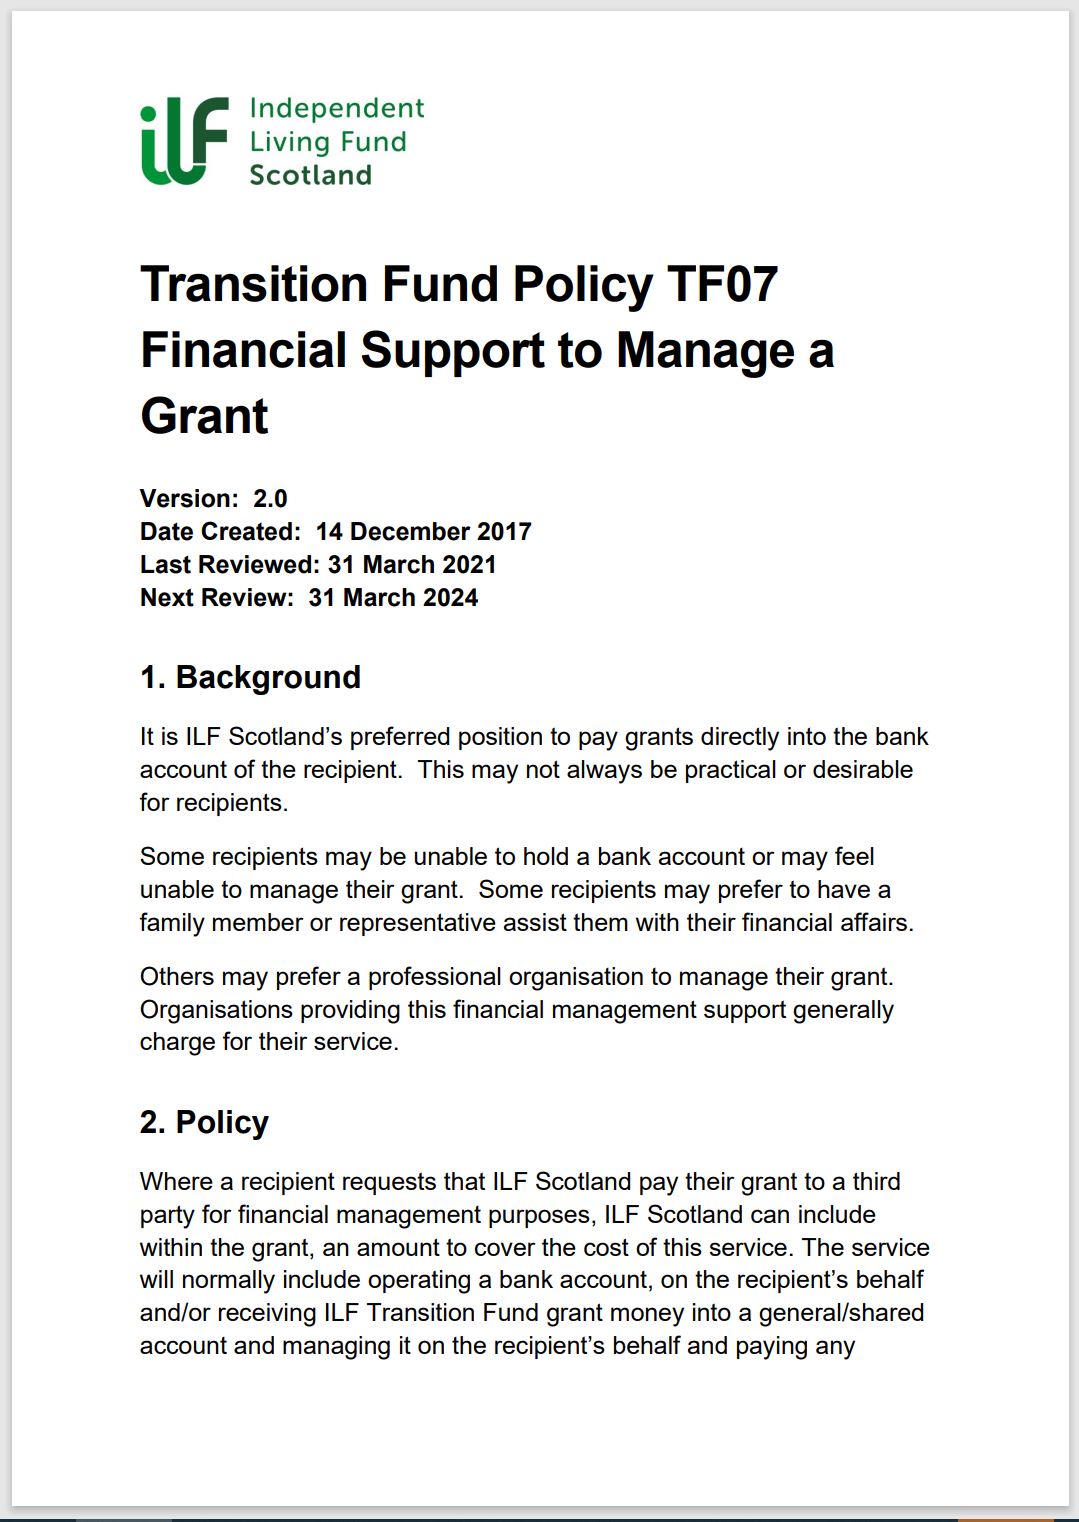 Cover page of policy TF07 showing ILF Scotland logo and policy text.